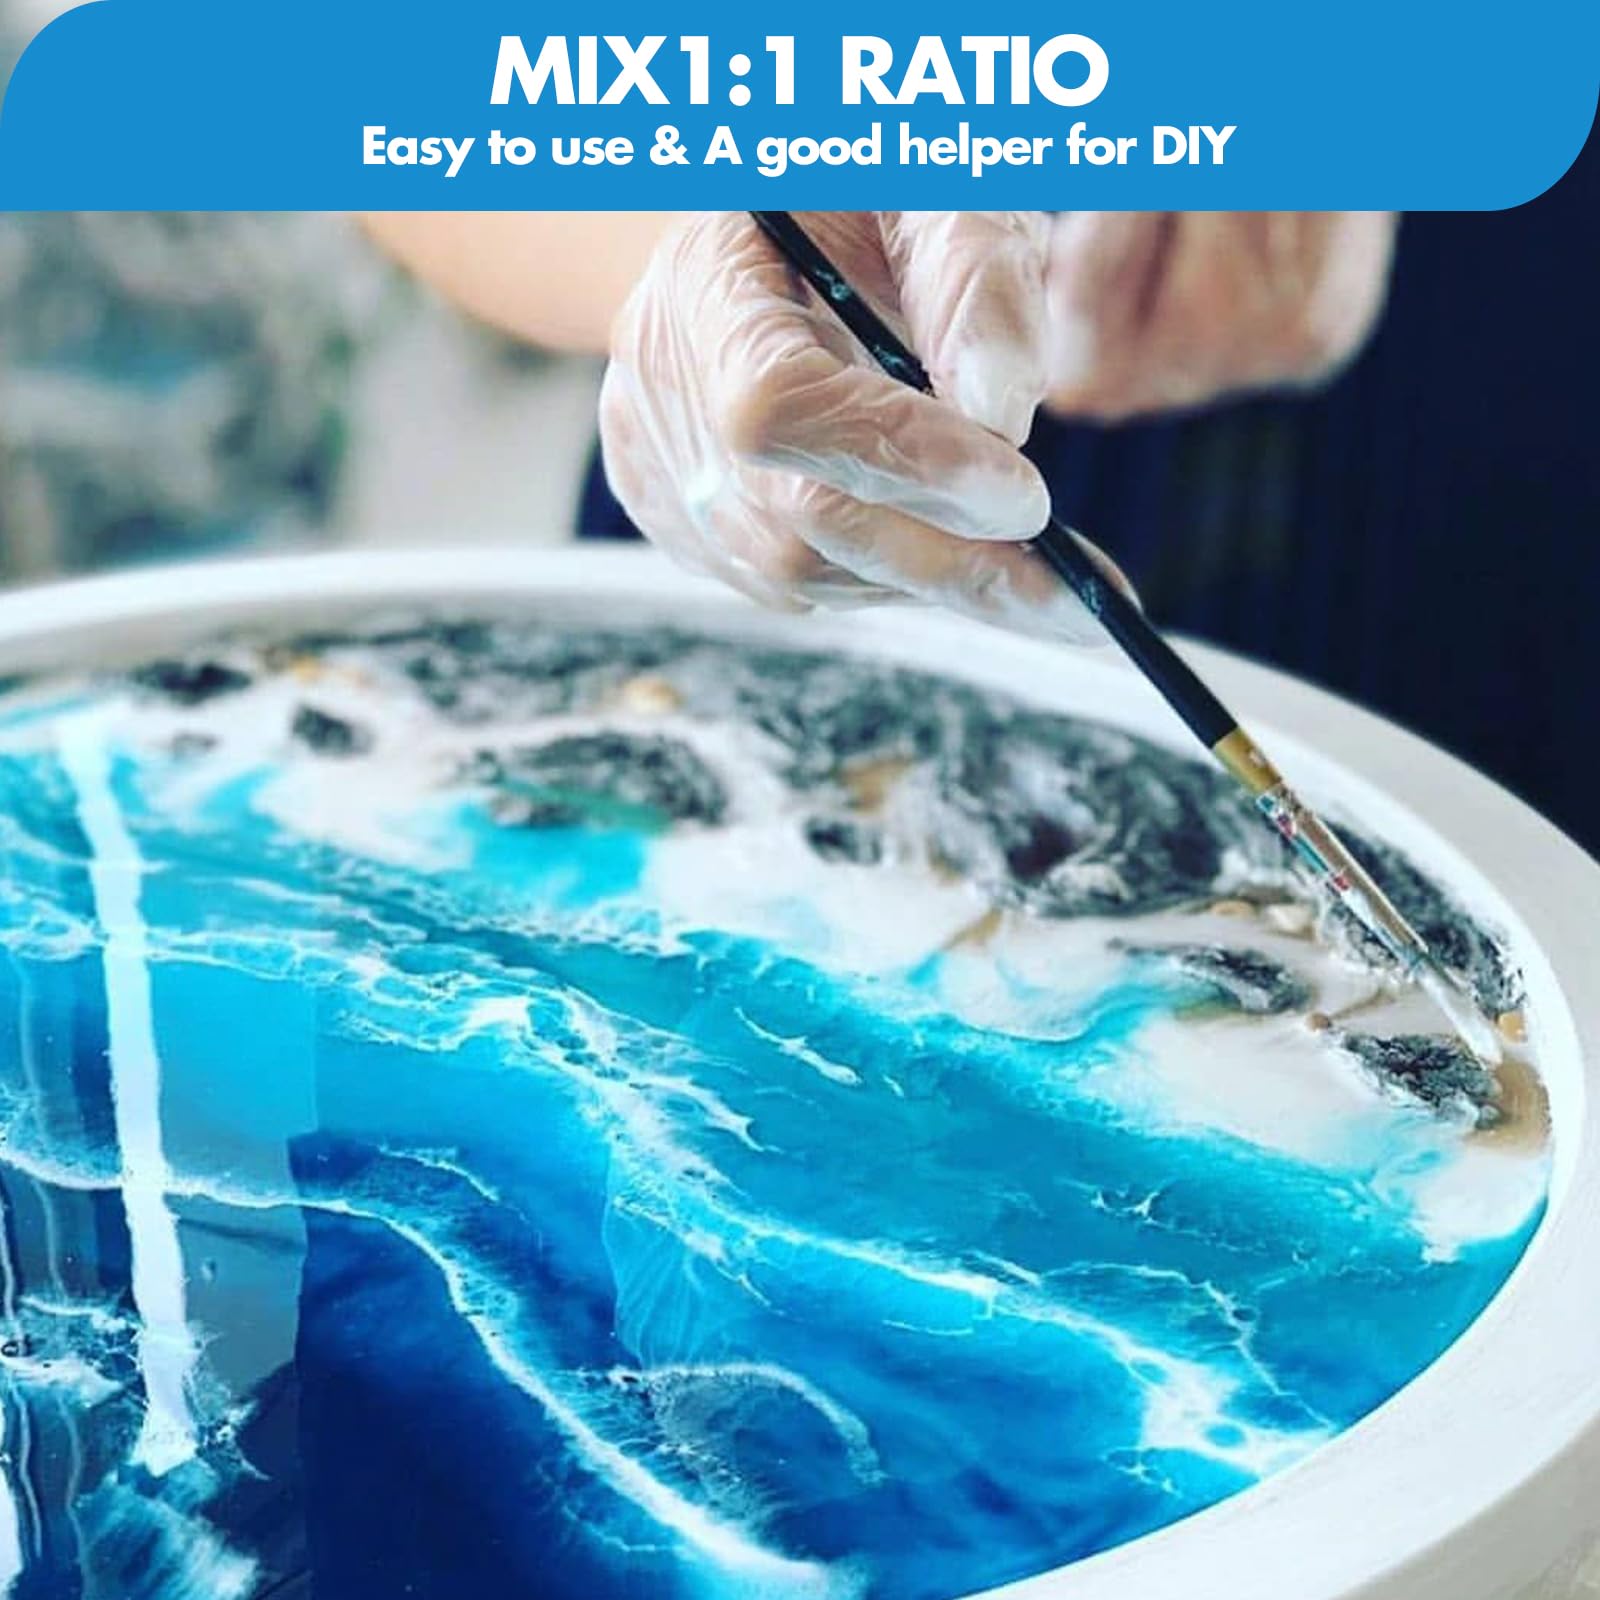 Shabebe Epoxy Resin 16OZ, Super Gloss Epoxy Resin Kit with UV Resistant, Fast Drying Art Resin Clear Casting Resin Epoxy for Art Crafts, Jewelry Making, Wood & Resin Molds